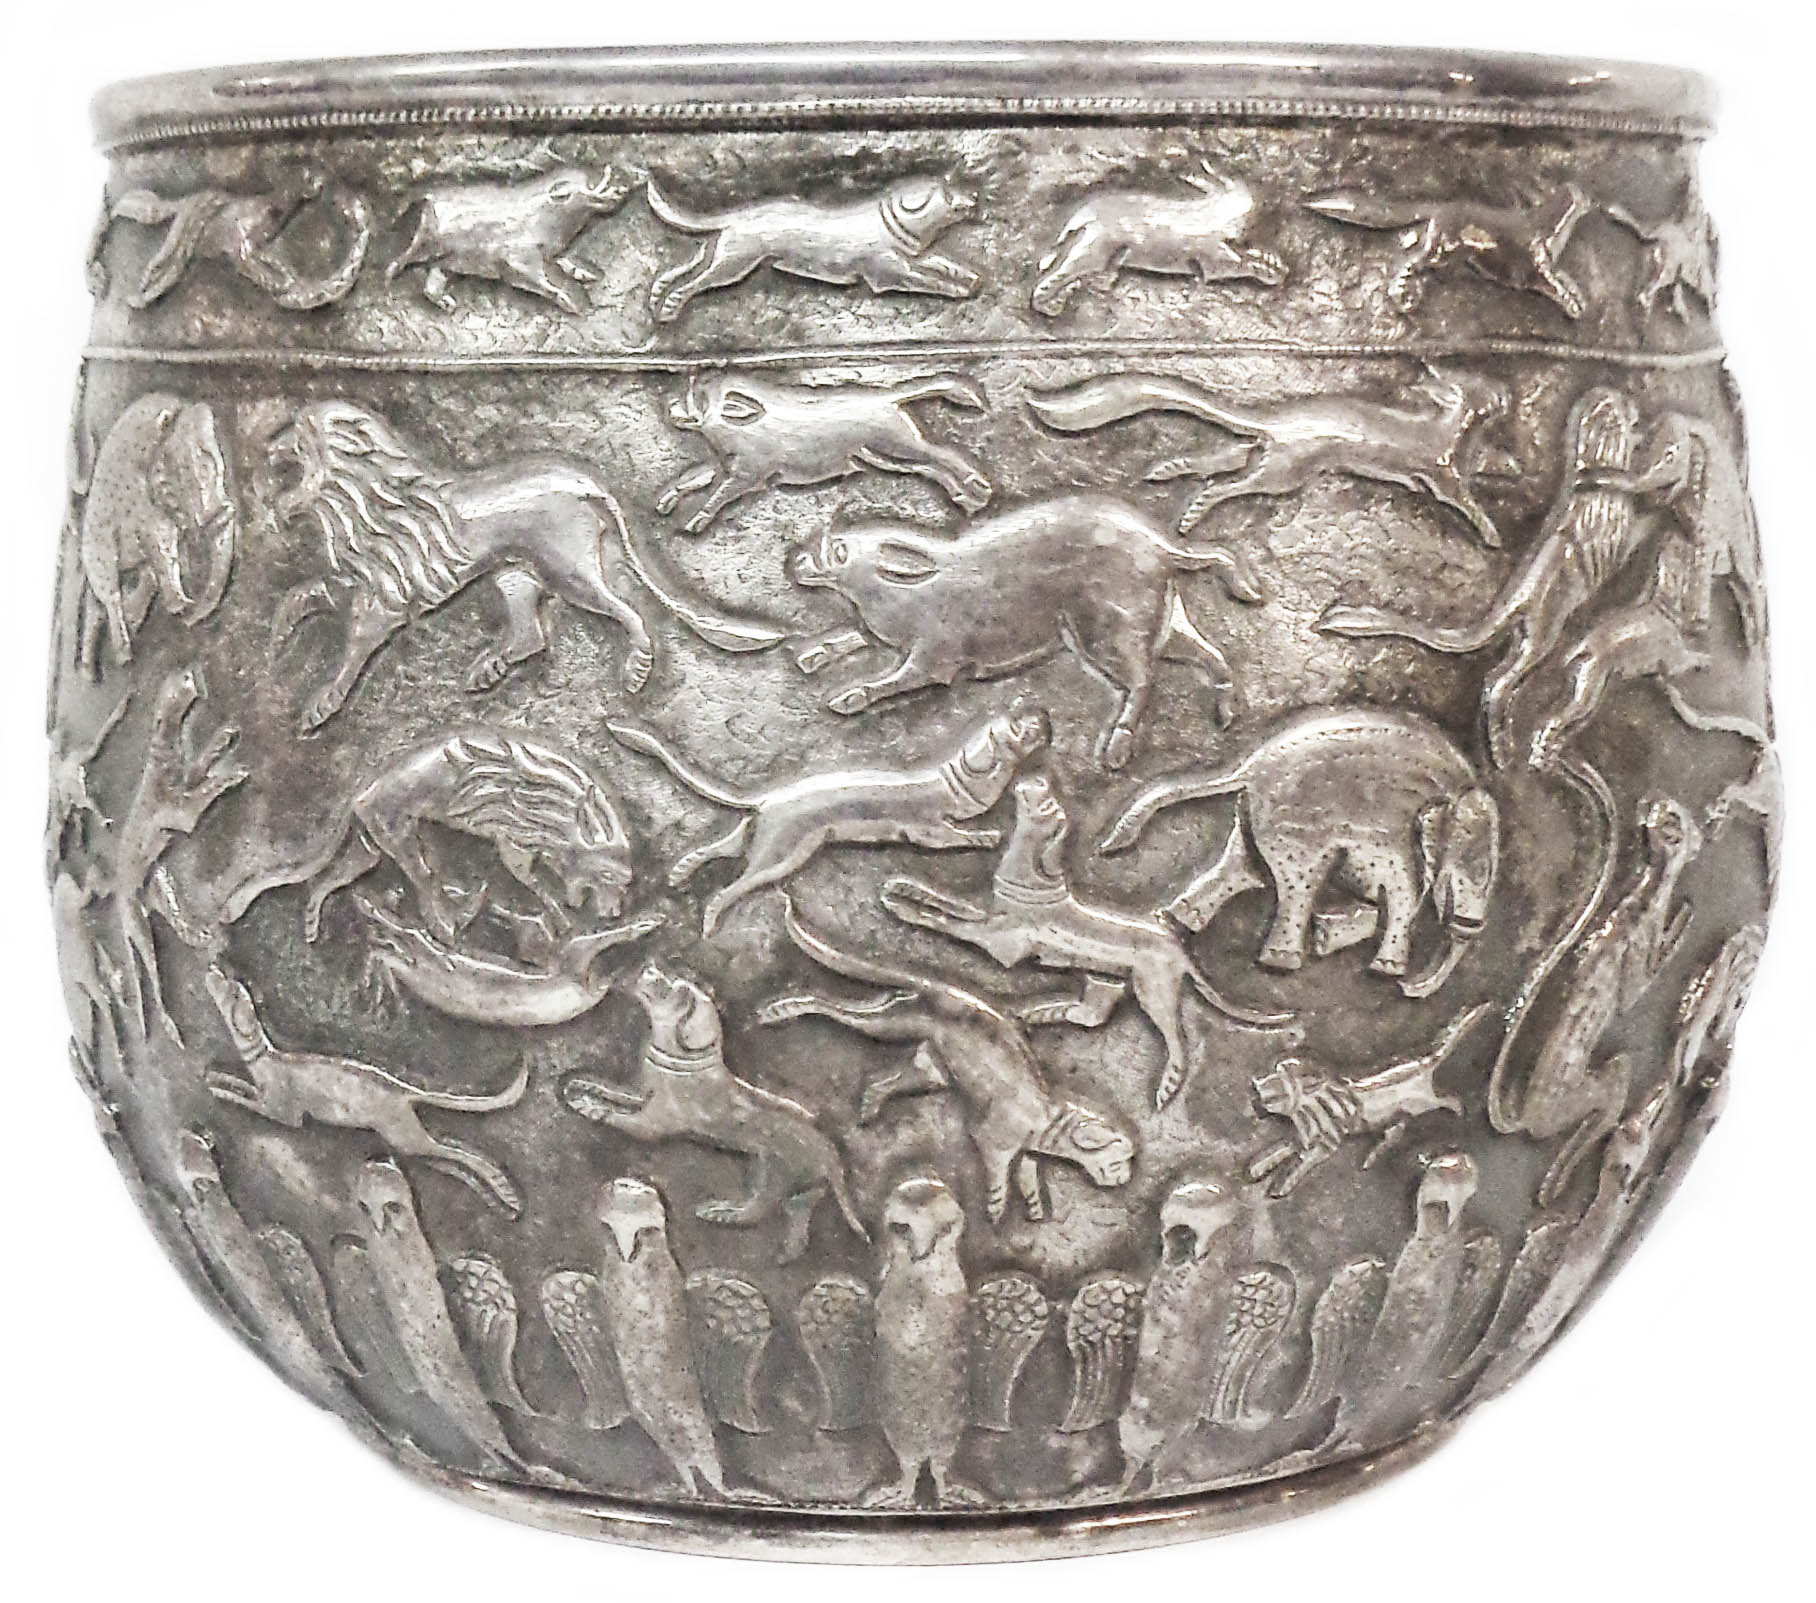 A 14.75cm high Anglo-Indian white metal jardinière with profuse embossed animal and bird decoration